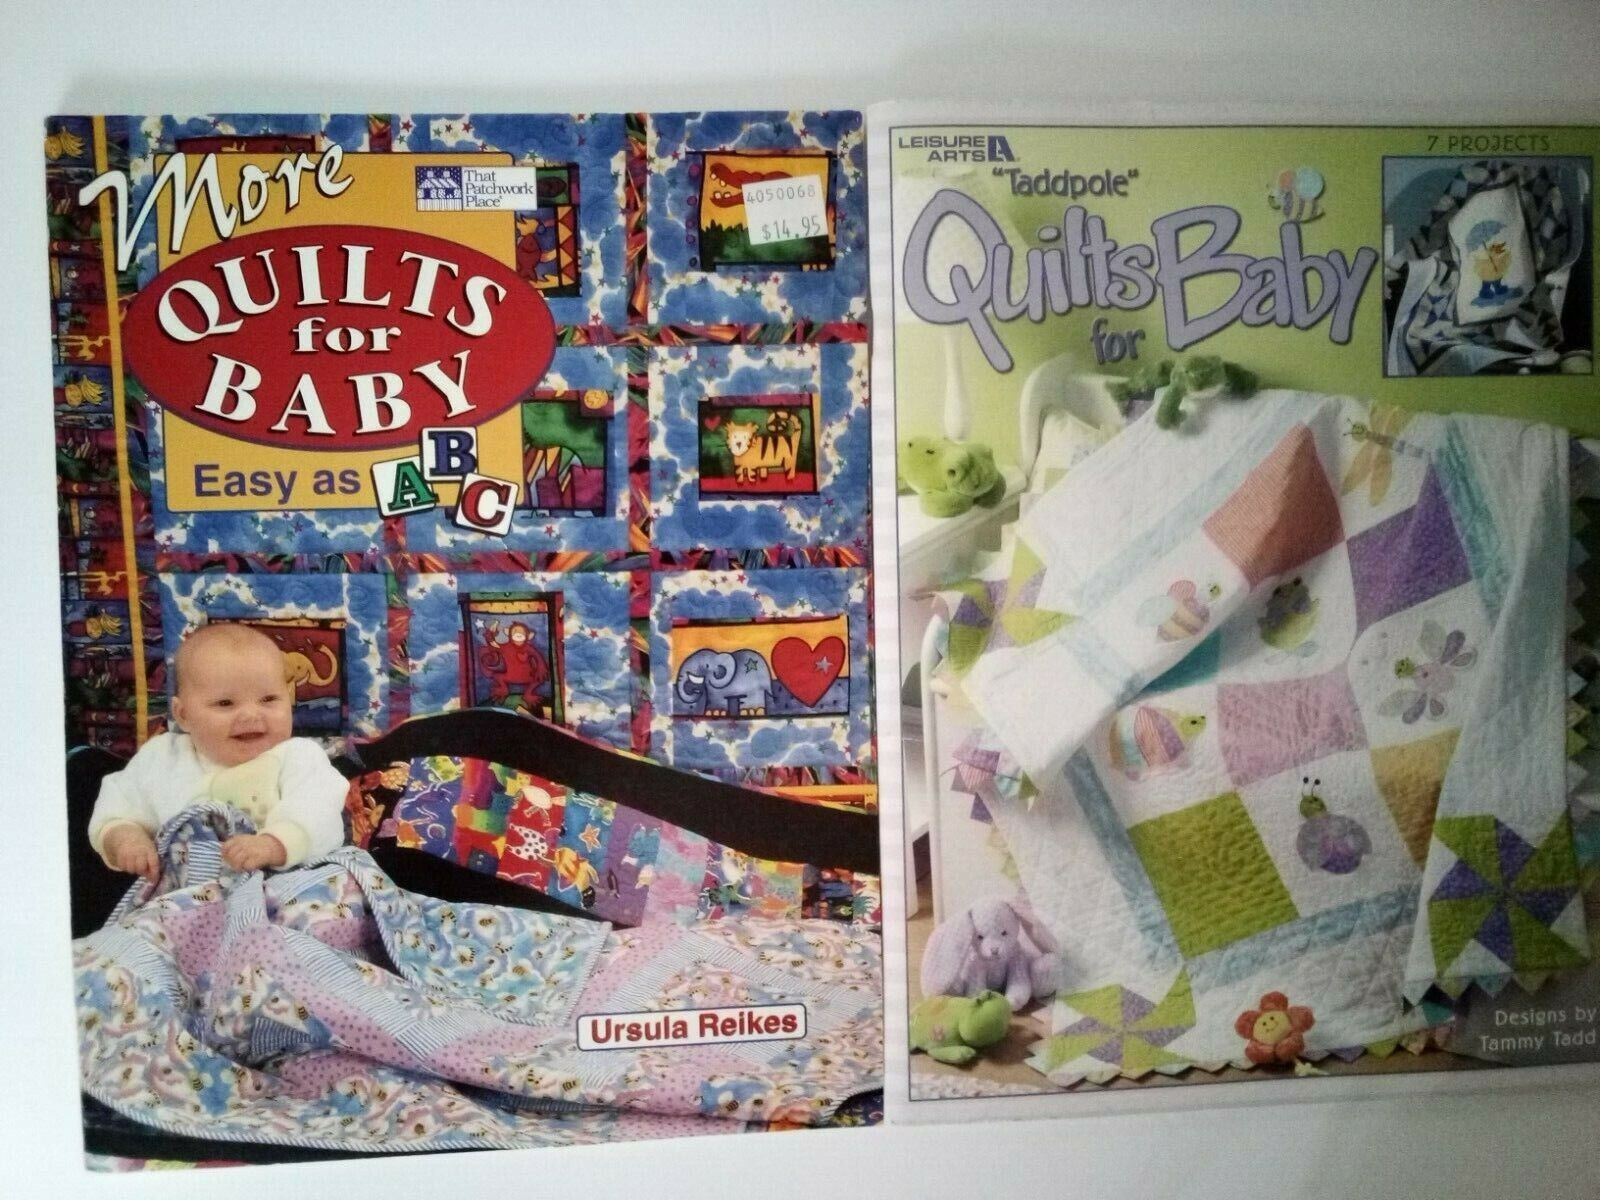 Lot of 2 Baby Quilting Books ~ More Quilts for Baby & Taddpole Quilts for Baby Patchwork Place & Leisure Arts